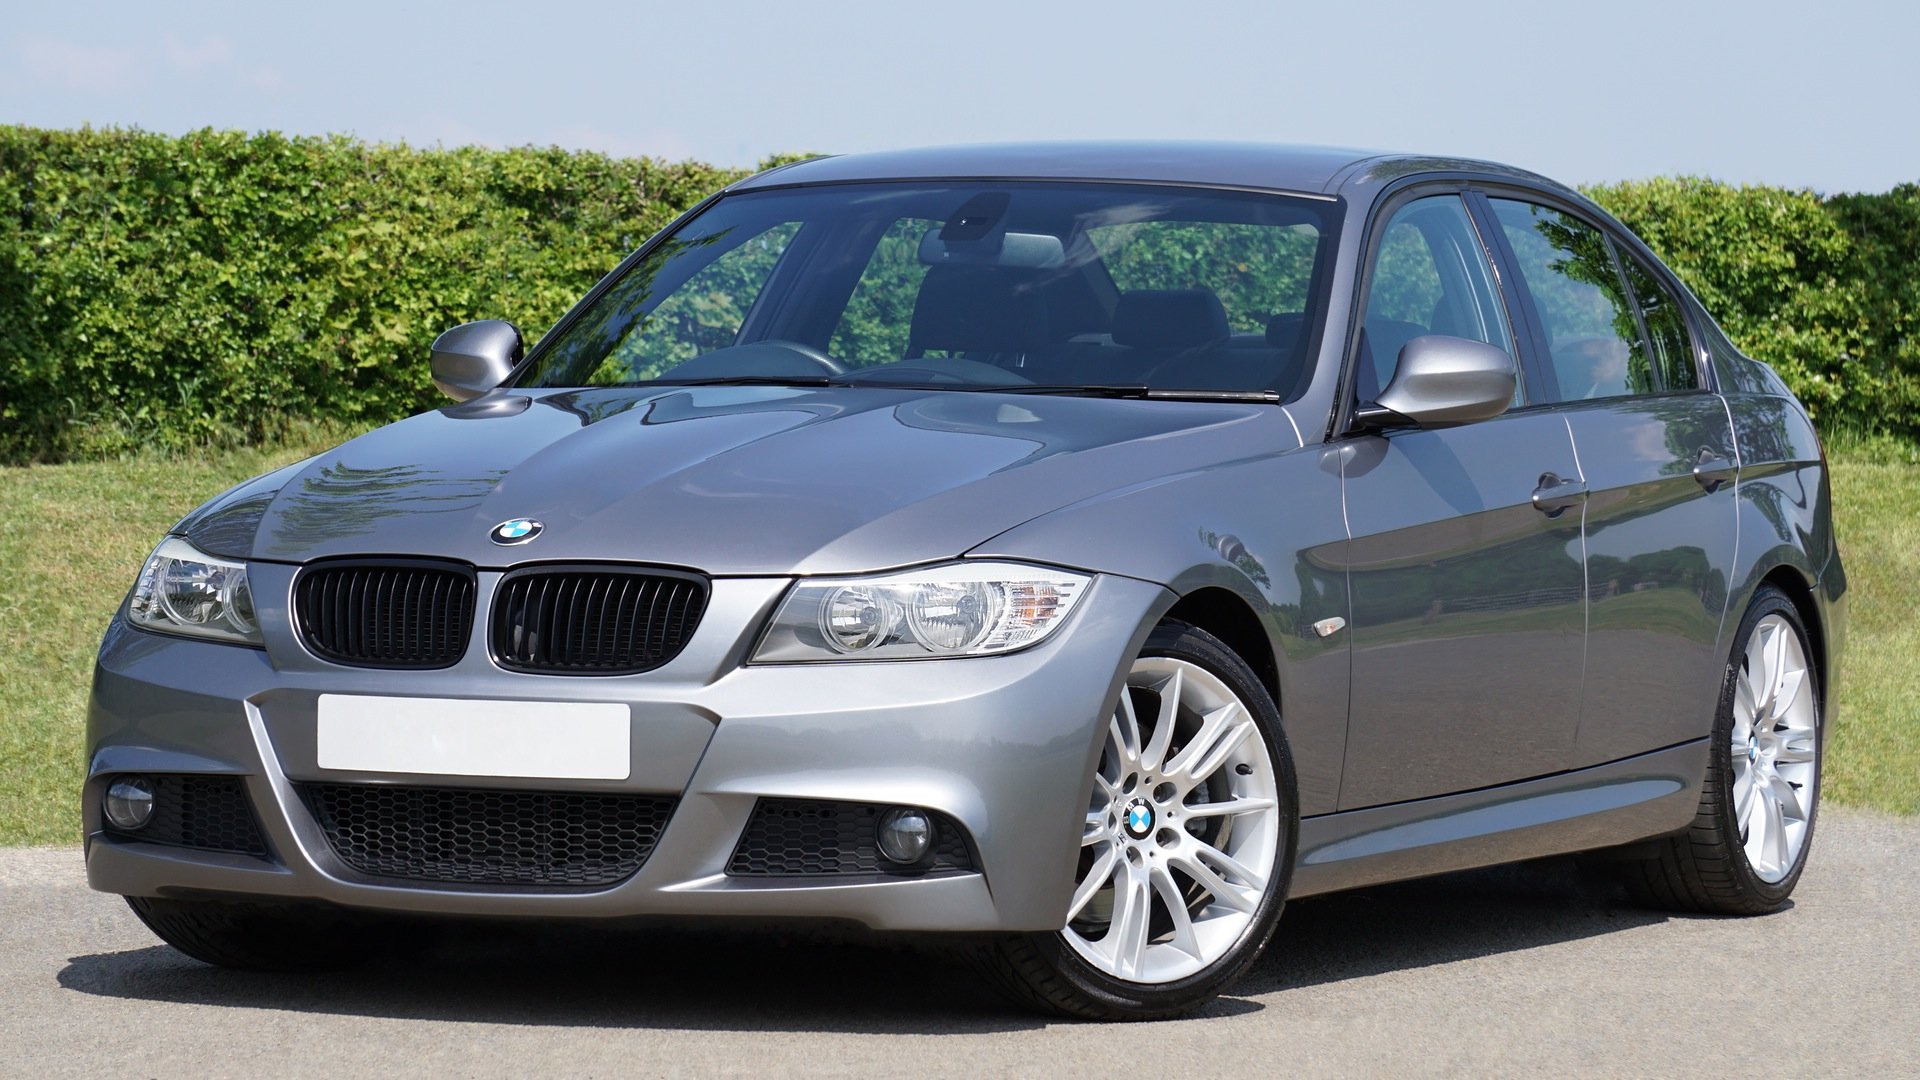 Cost of Car Insurance for a BMW 3 Series